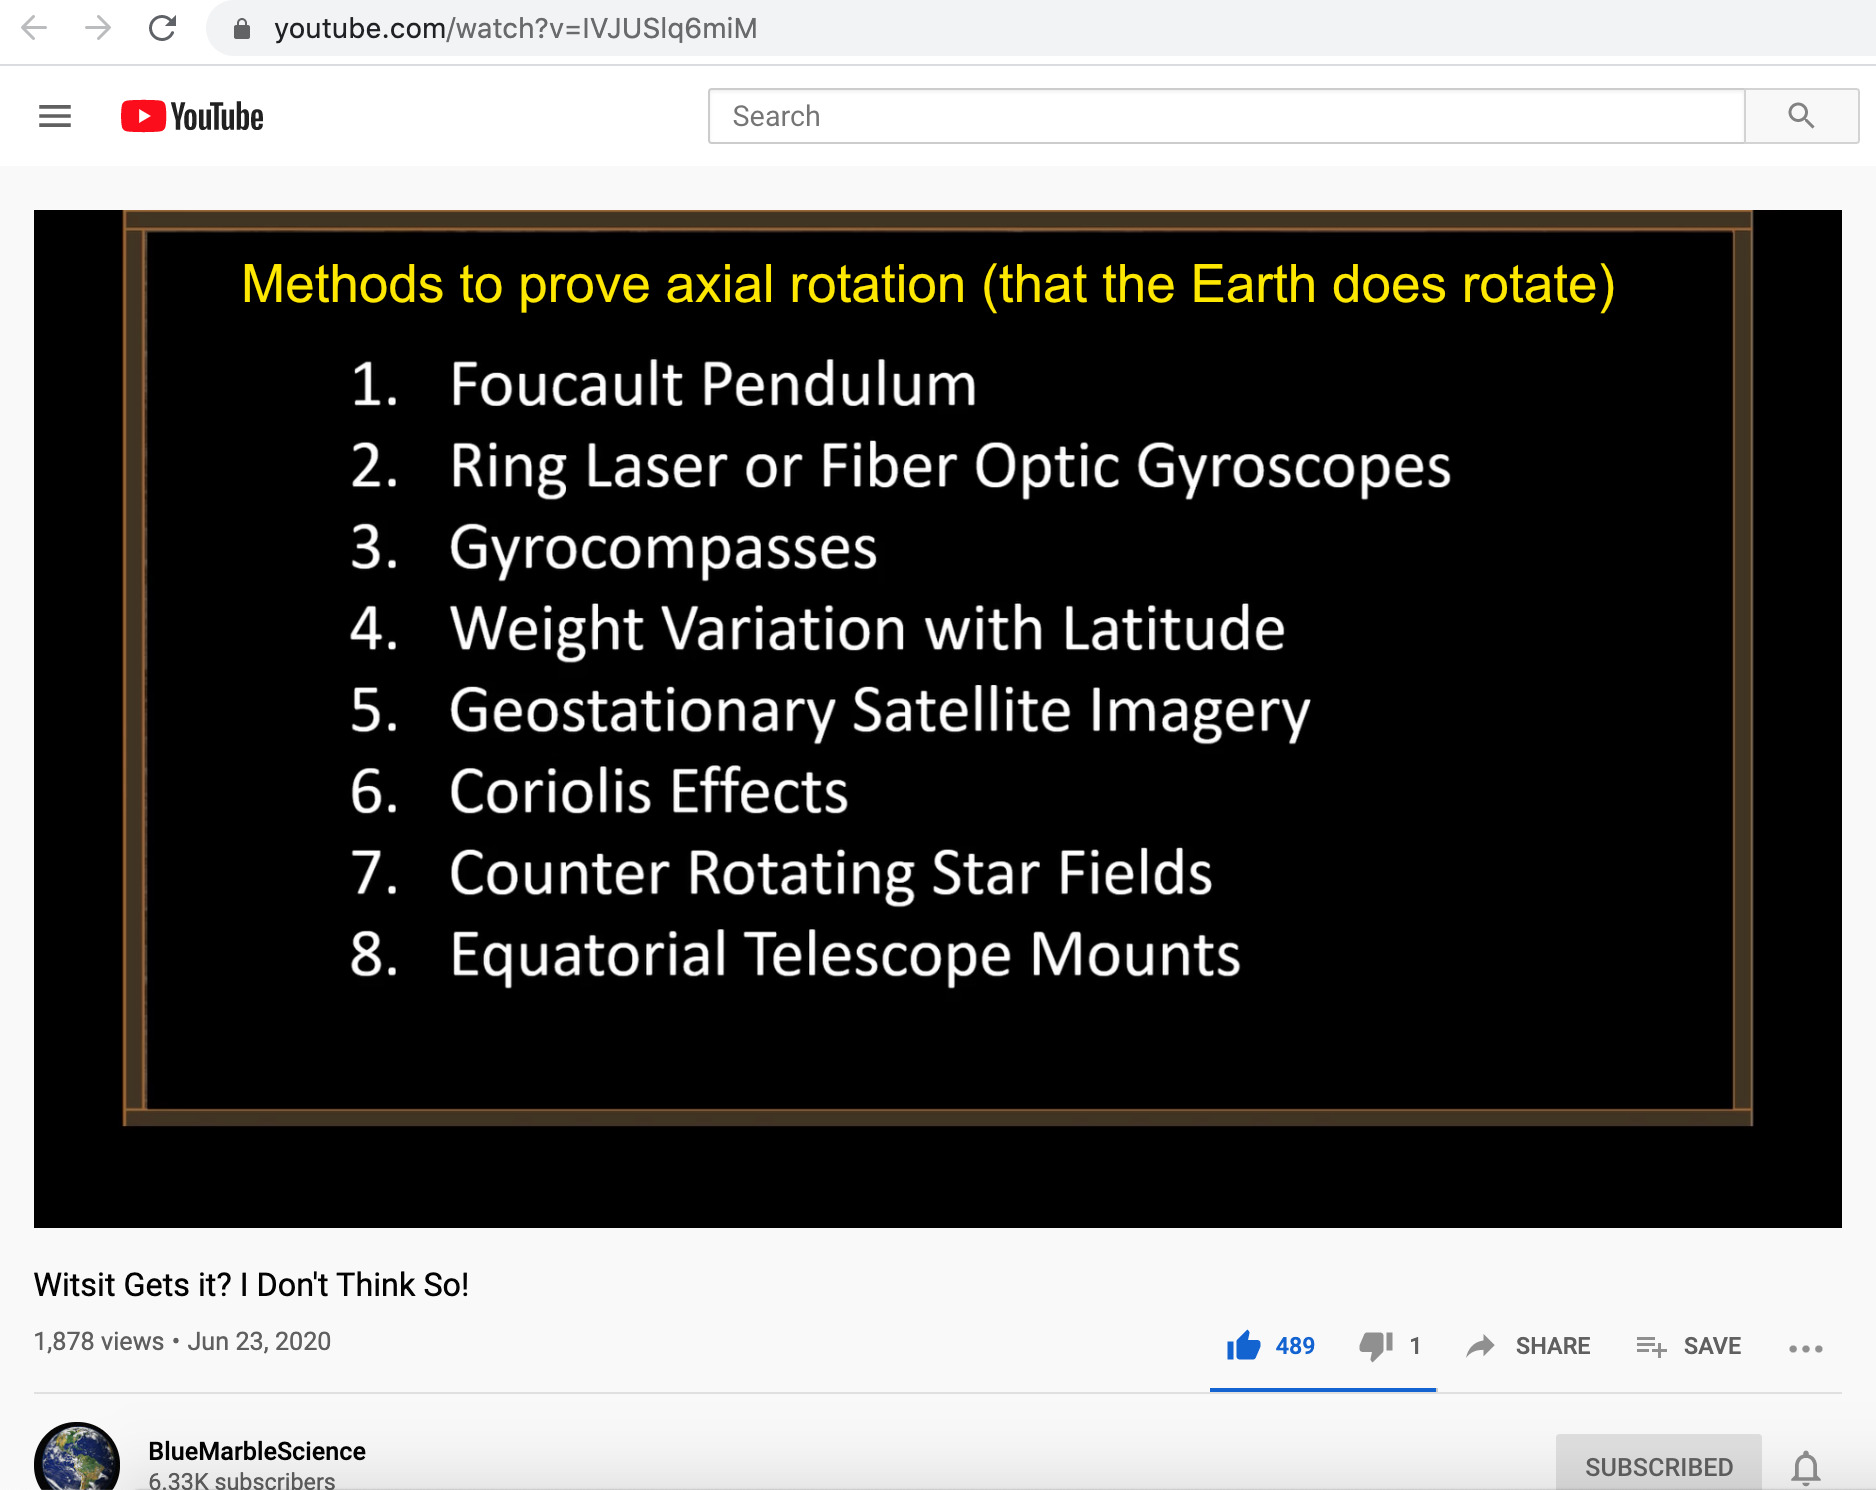 Methods to prove axial rotation - that the Earth does rotate.jpg